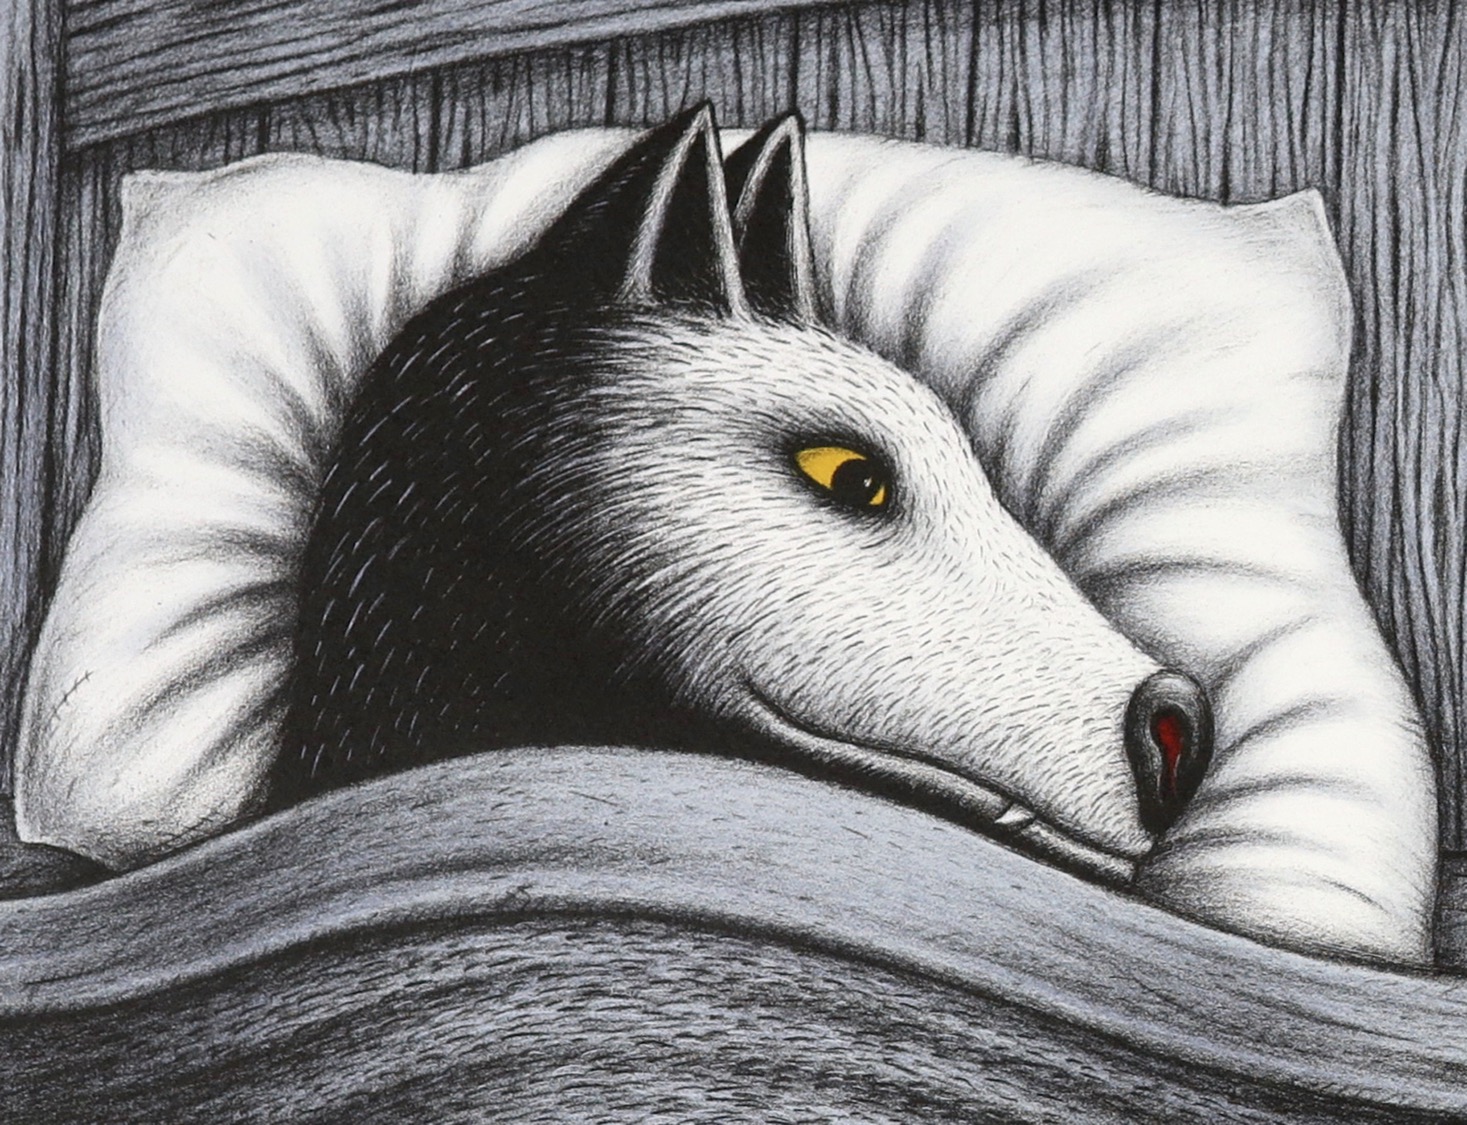 Detail of Bedfellows print showing the head of wide-awake dog resting on pillow